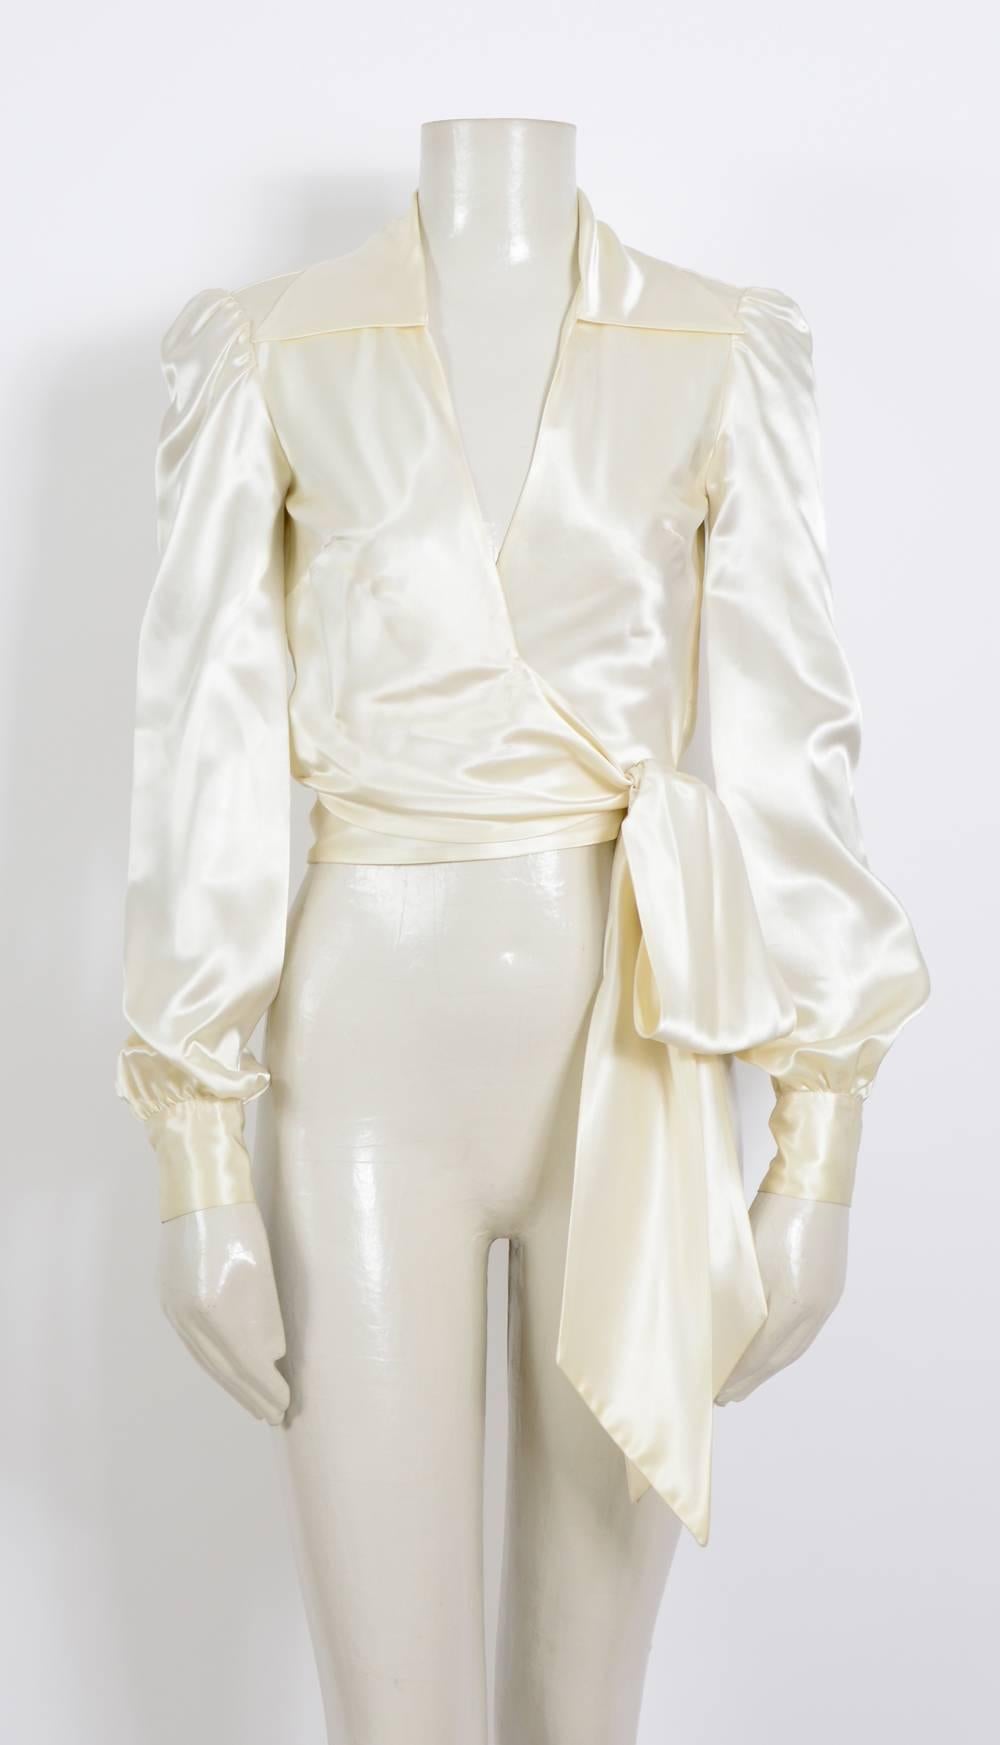 Silk satin creme 1970's vintage very chic top by Jean Patou
Size french 38
Measurements were taken flat.
Sh to Sh 14,5inch/37cm - Ua to Ua 16inch/41cm(x2) - Waist 15inch/38cm(x2) - Sleeve 26inch/66cm